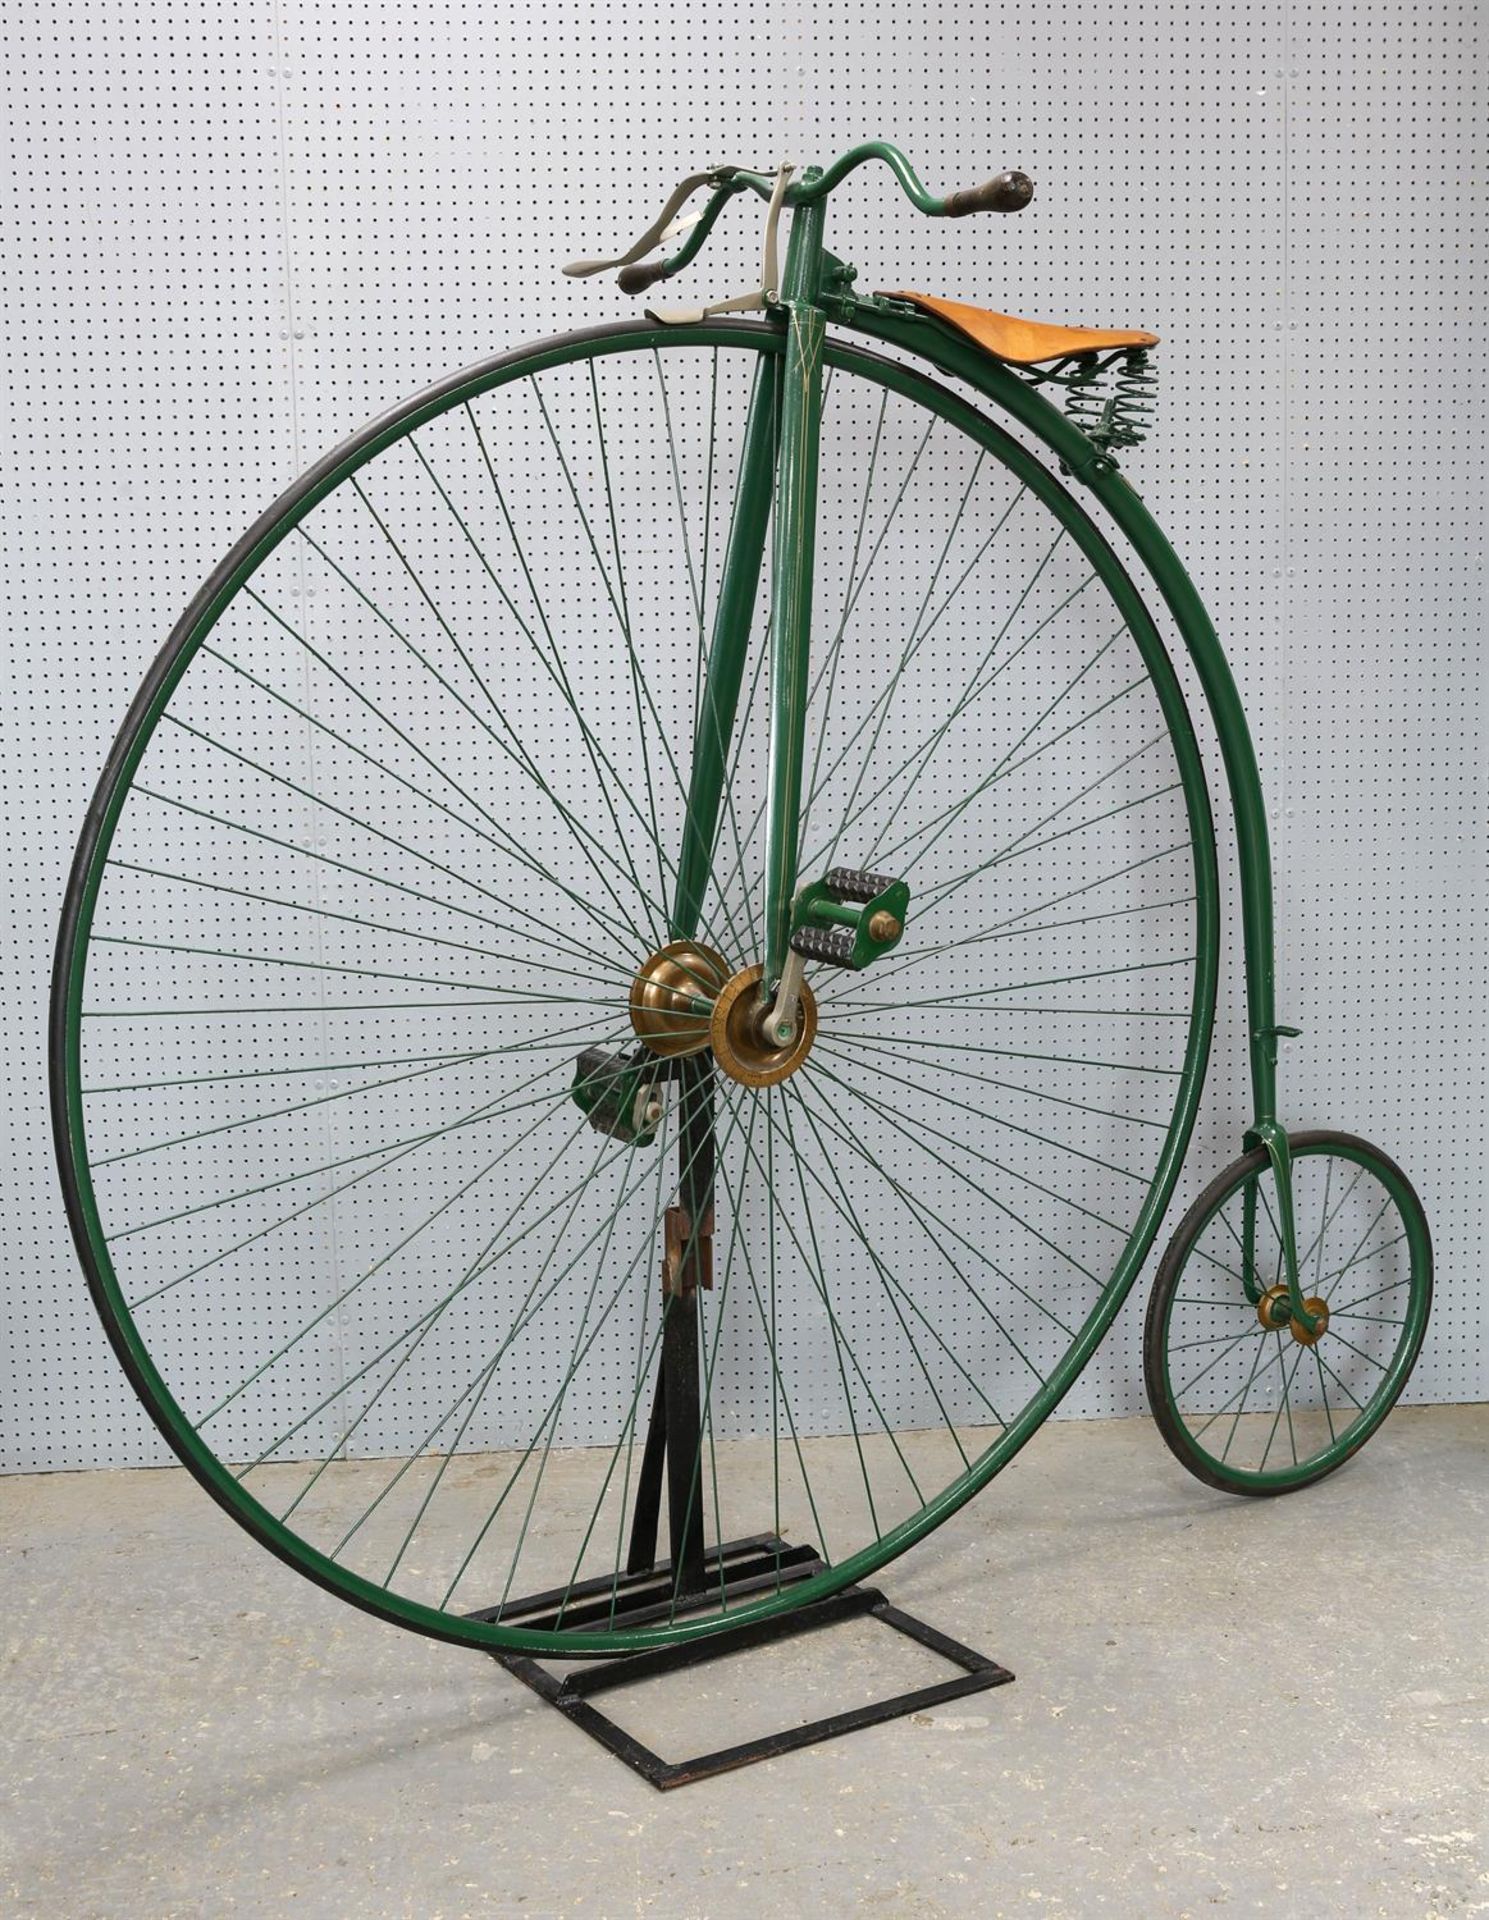 A penny-farthing / ordinary bicycle, with green painted steel frame, applied with shield to